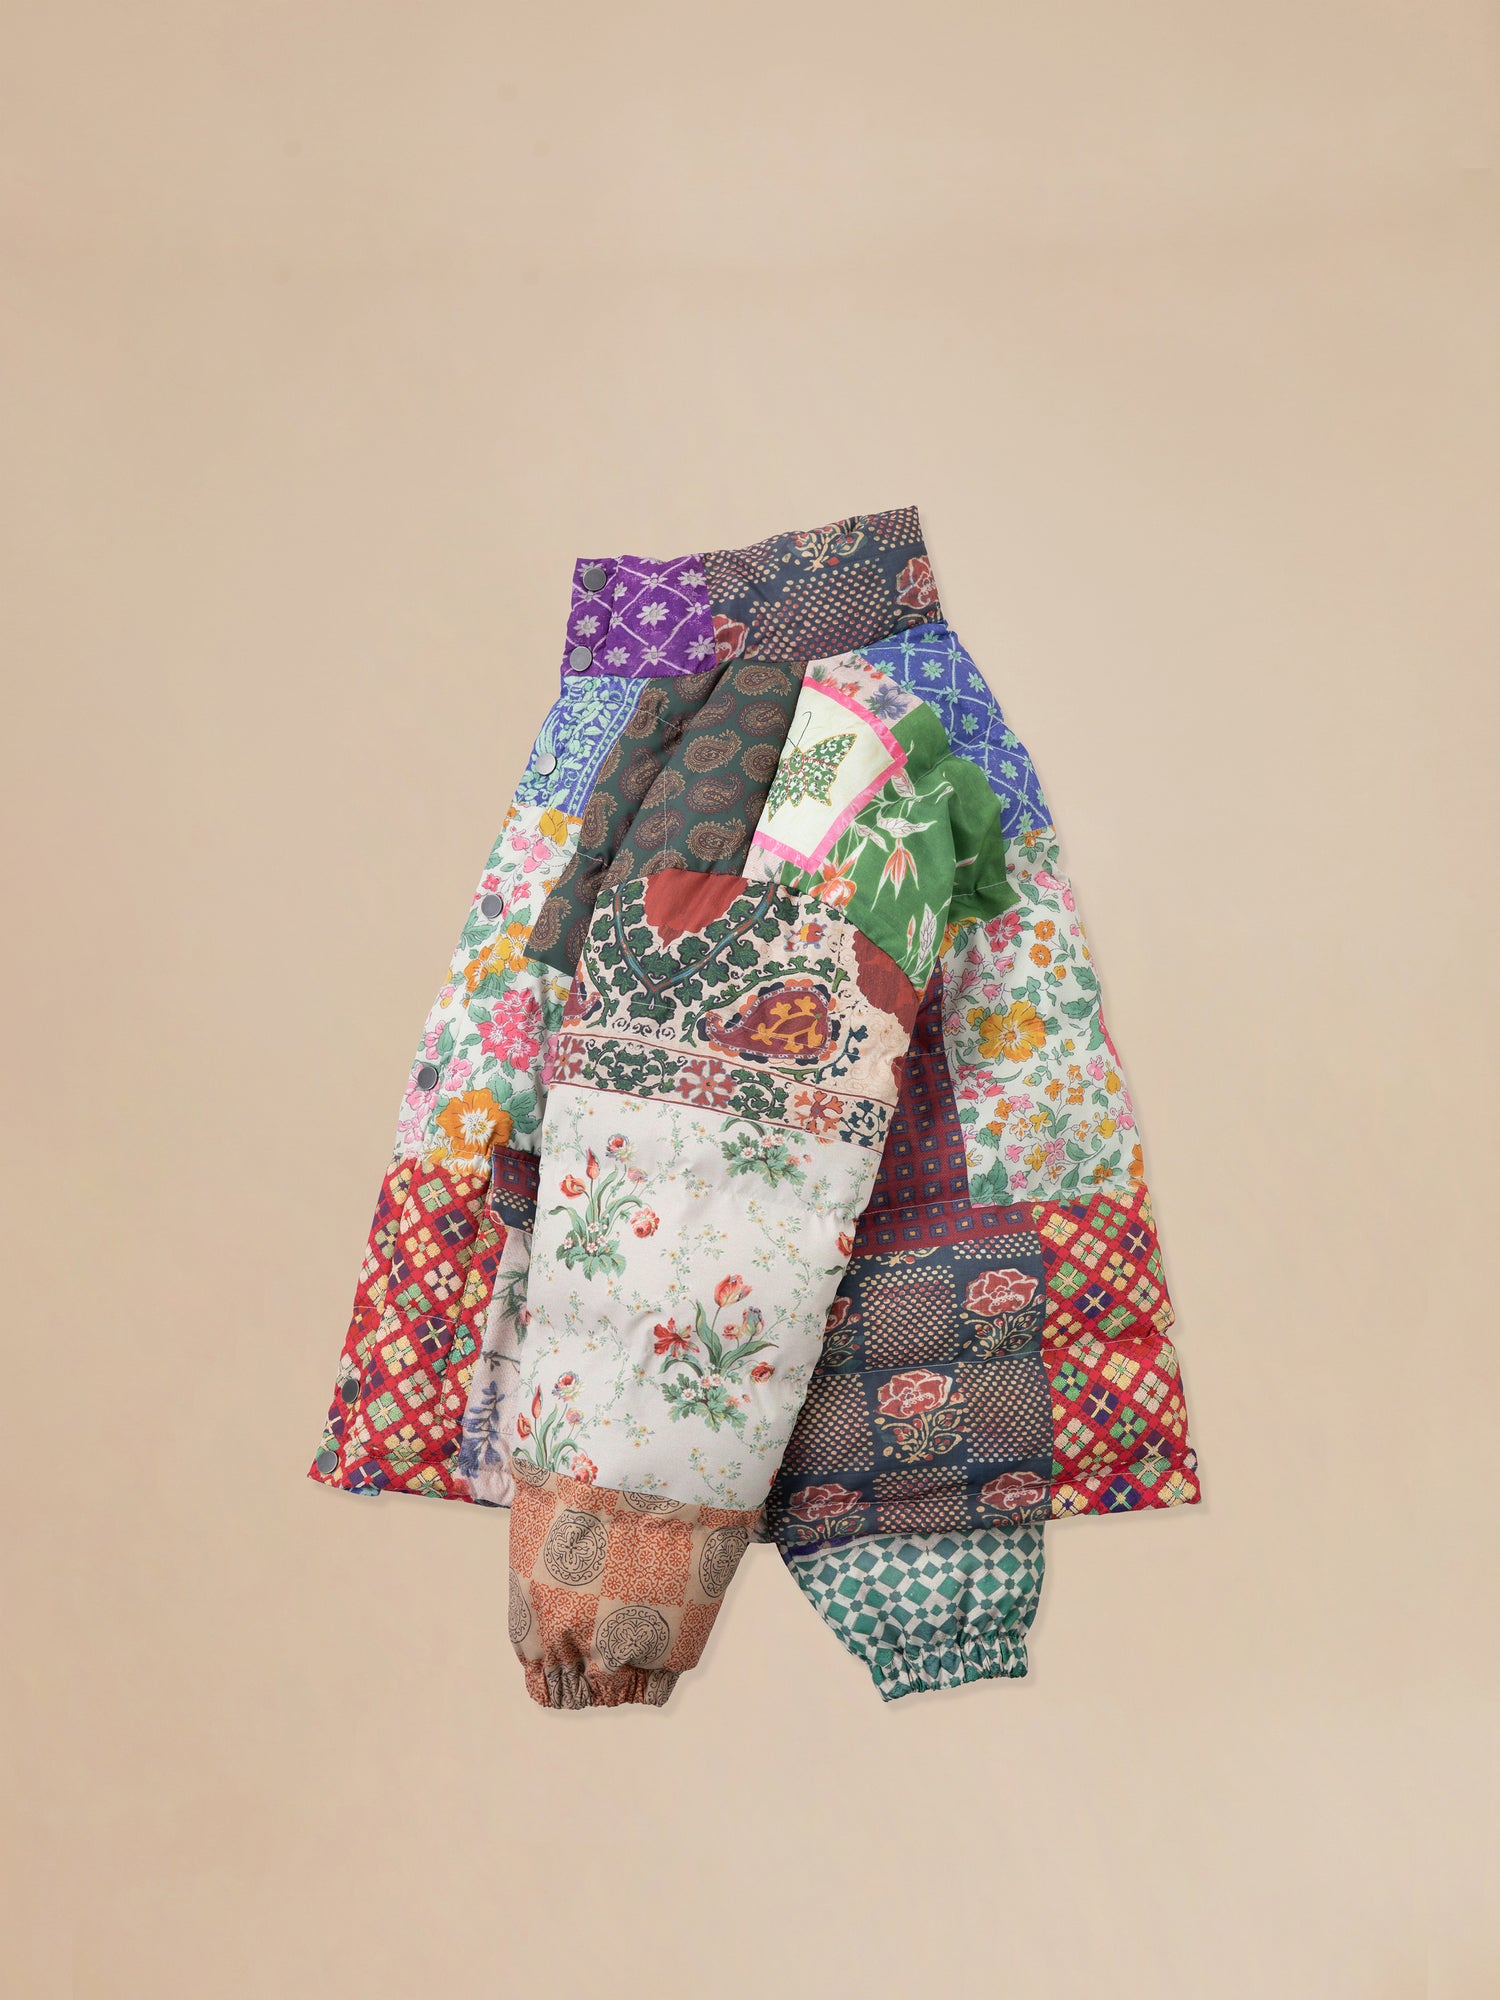 A Gardenia Tapestry Puffer Jacket featuring traditional South Asian prints on a beige background. (Brand: Found)